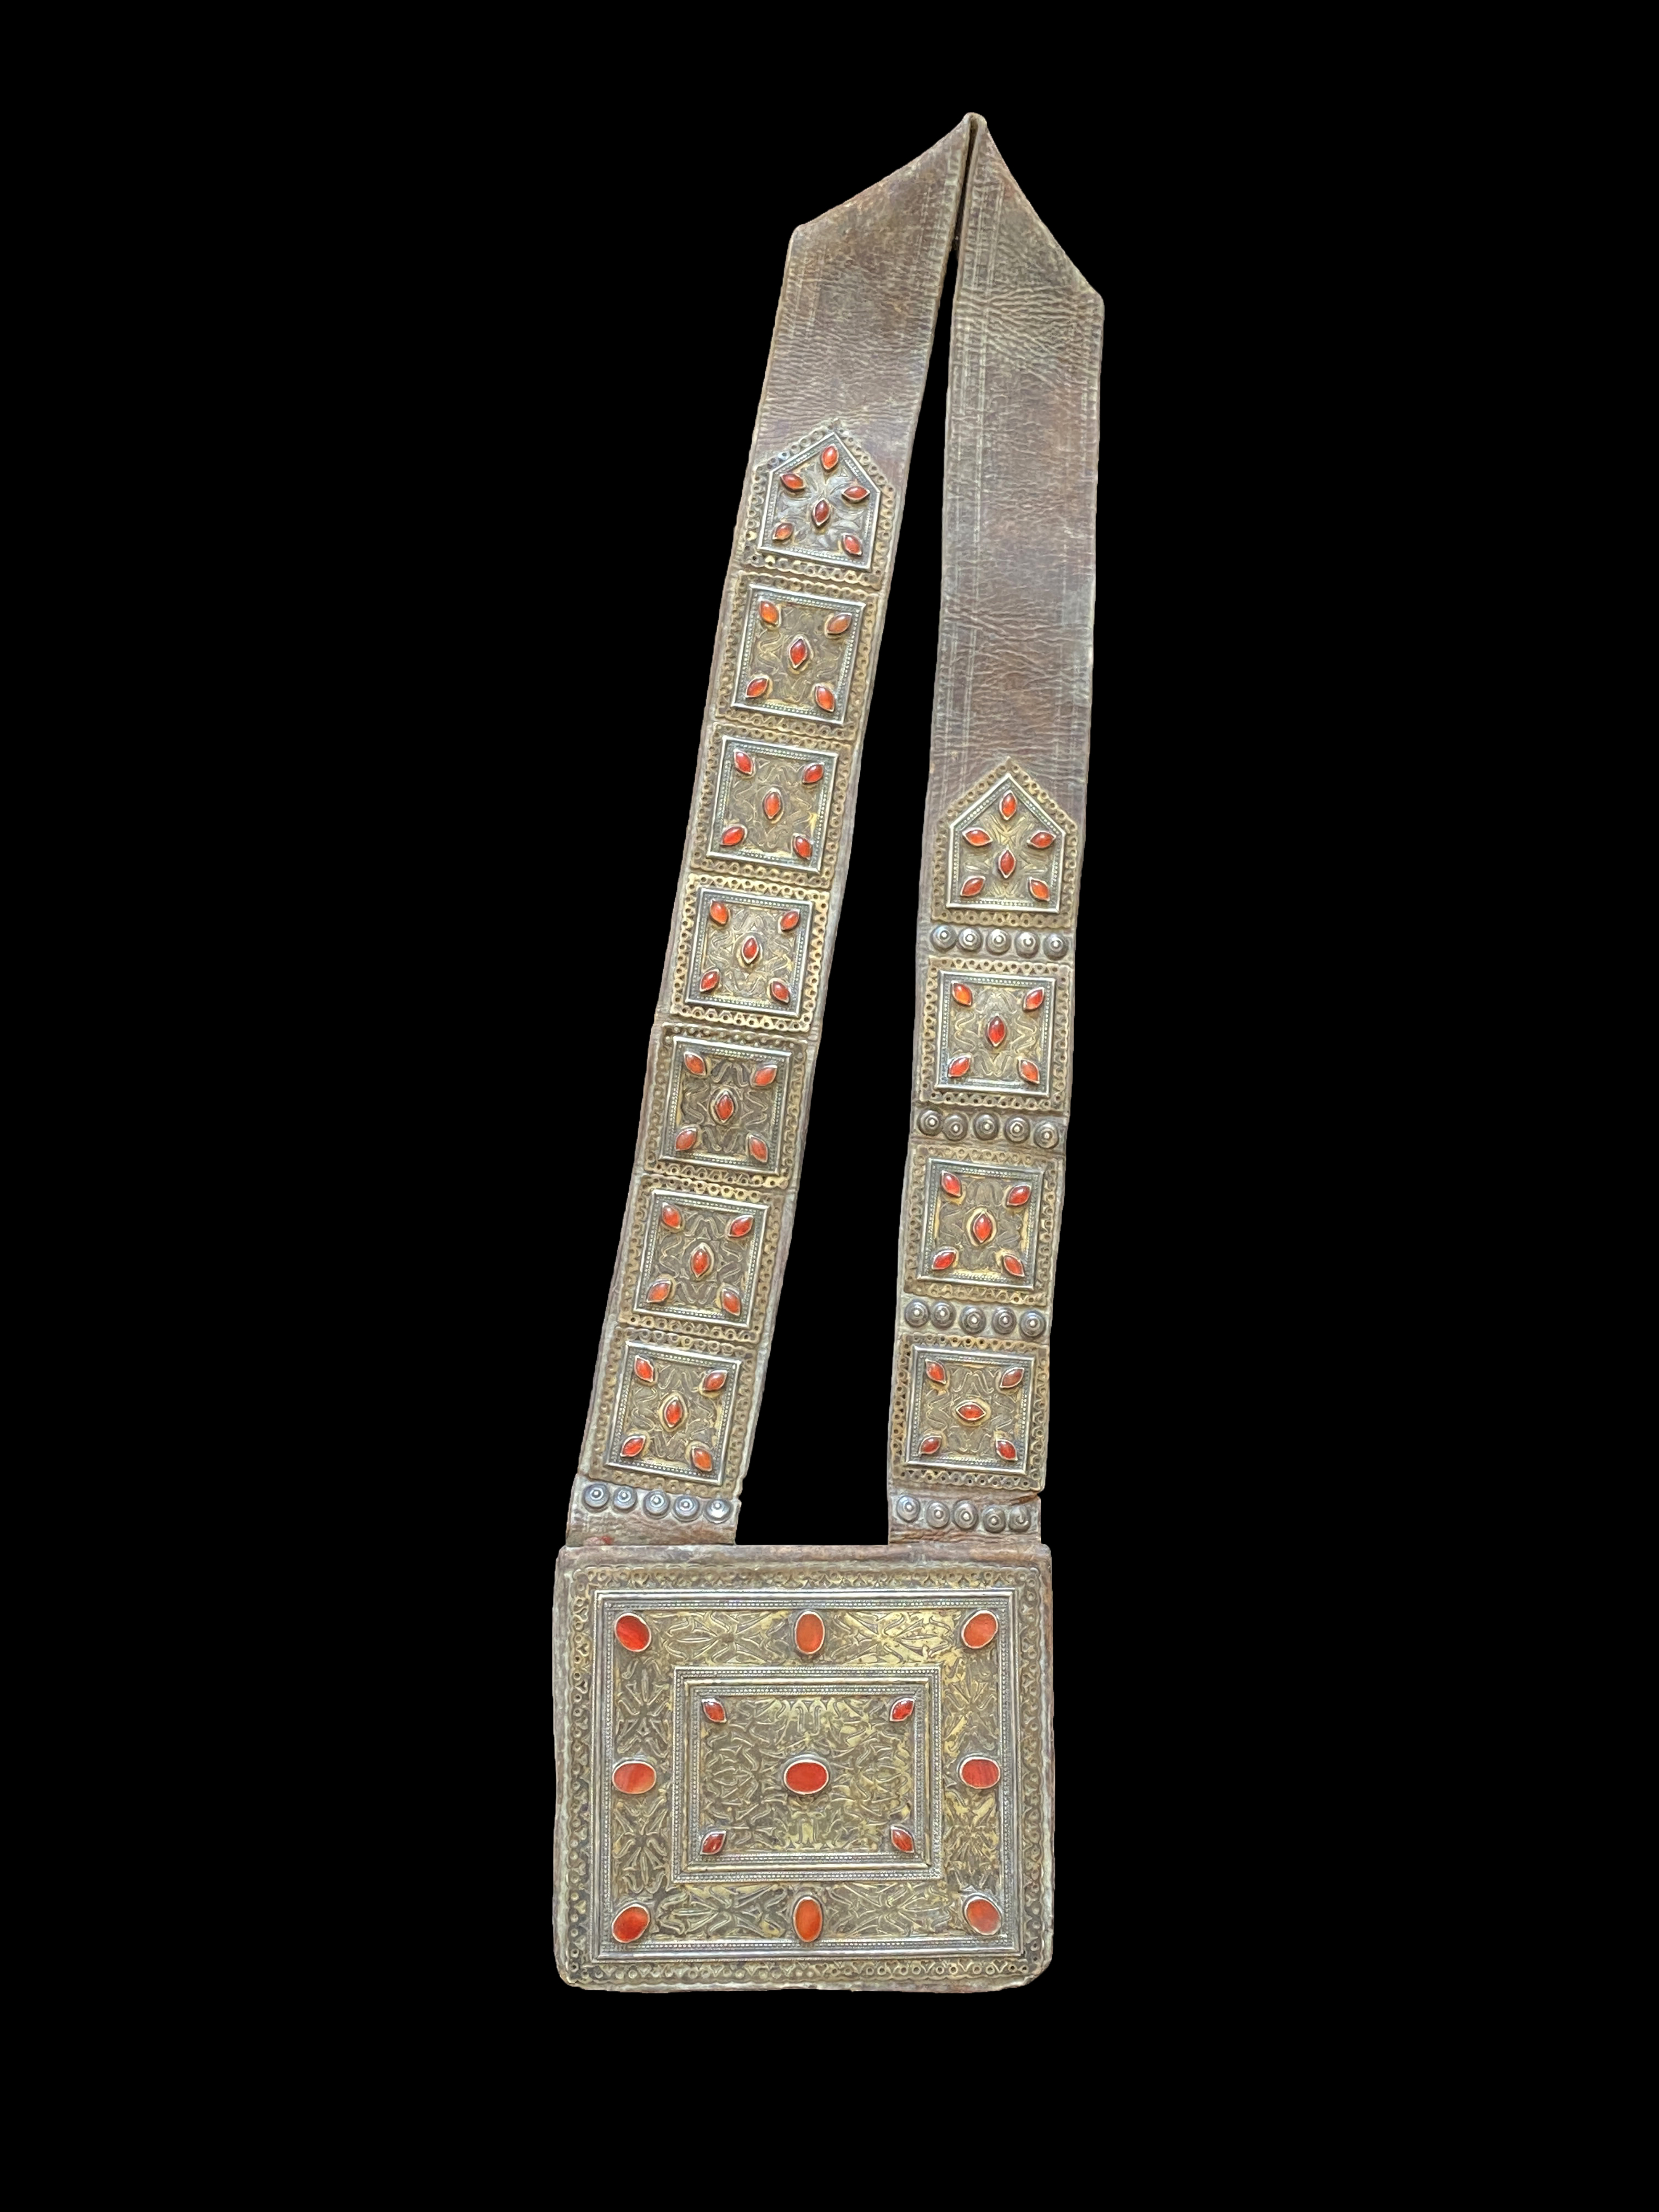 19th C. Amulet pouch - Tekke People - subgroup of Turkoman, Afghanistan - Central Asia